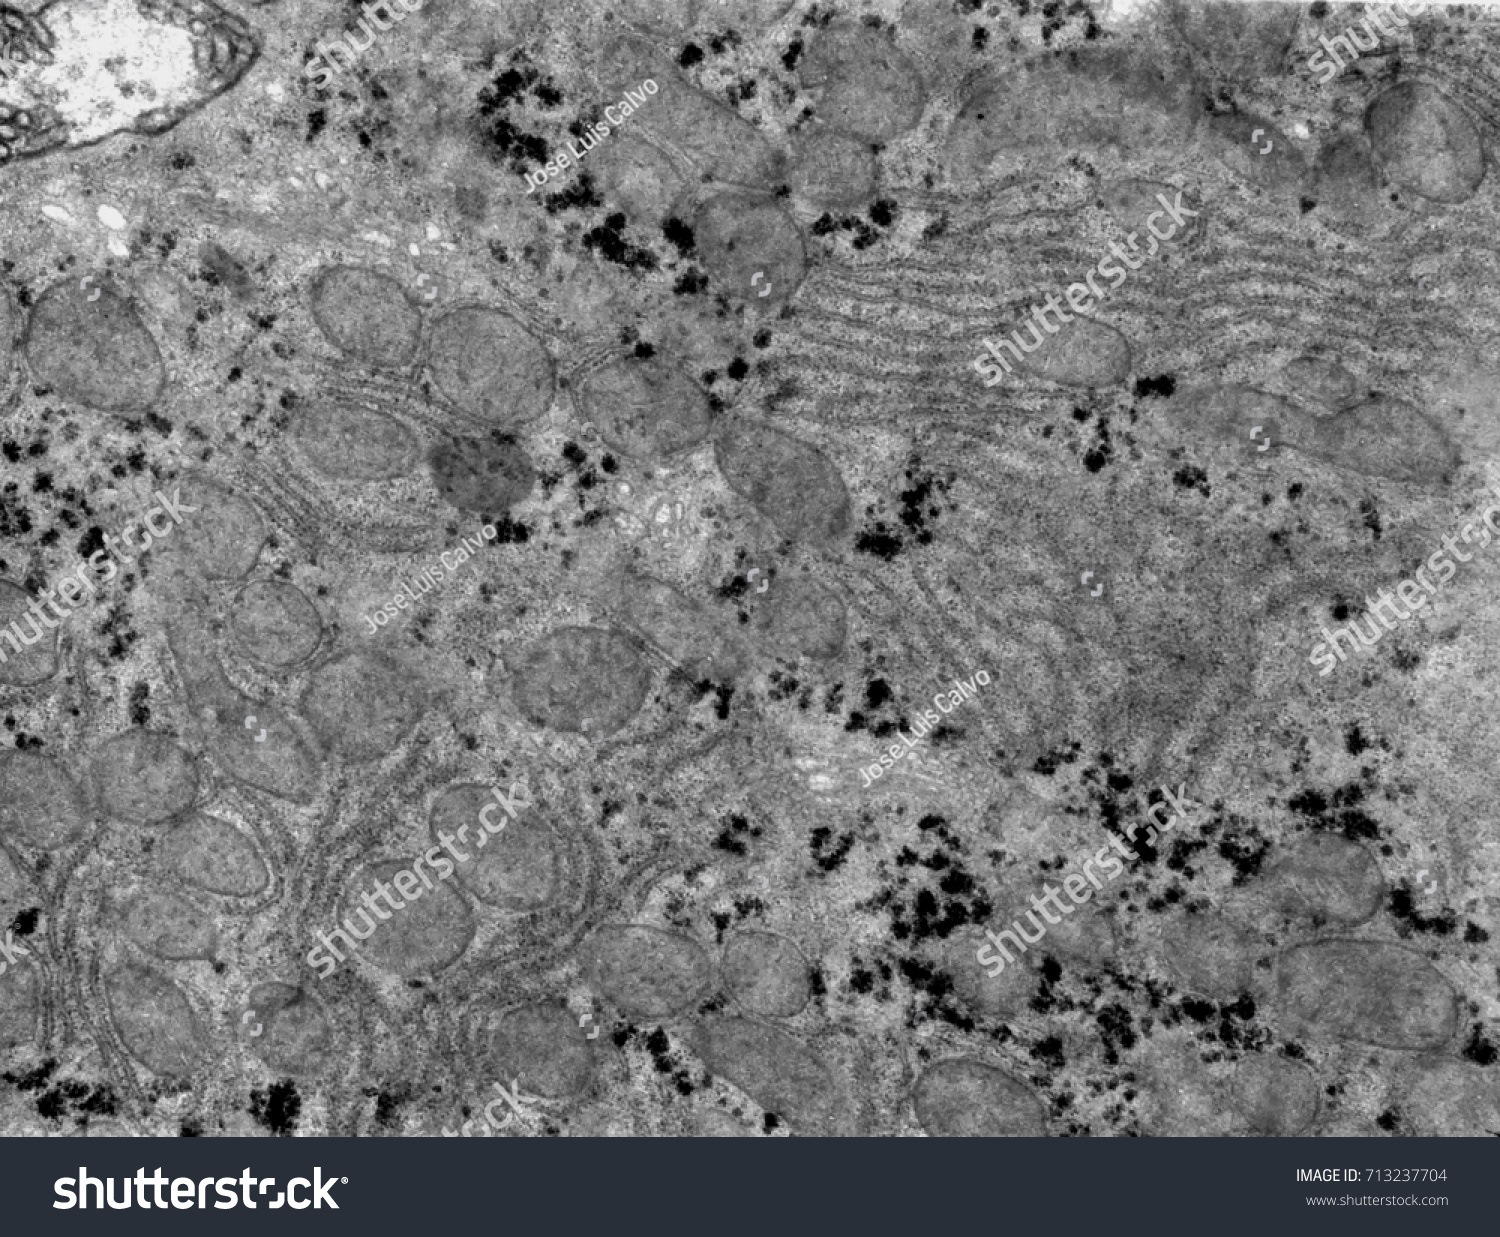 Transmission Electron Microscope Tem Micrograph Showing Stock Photo ...